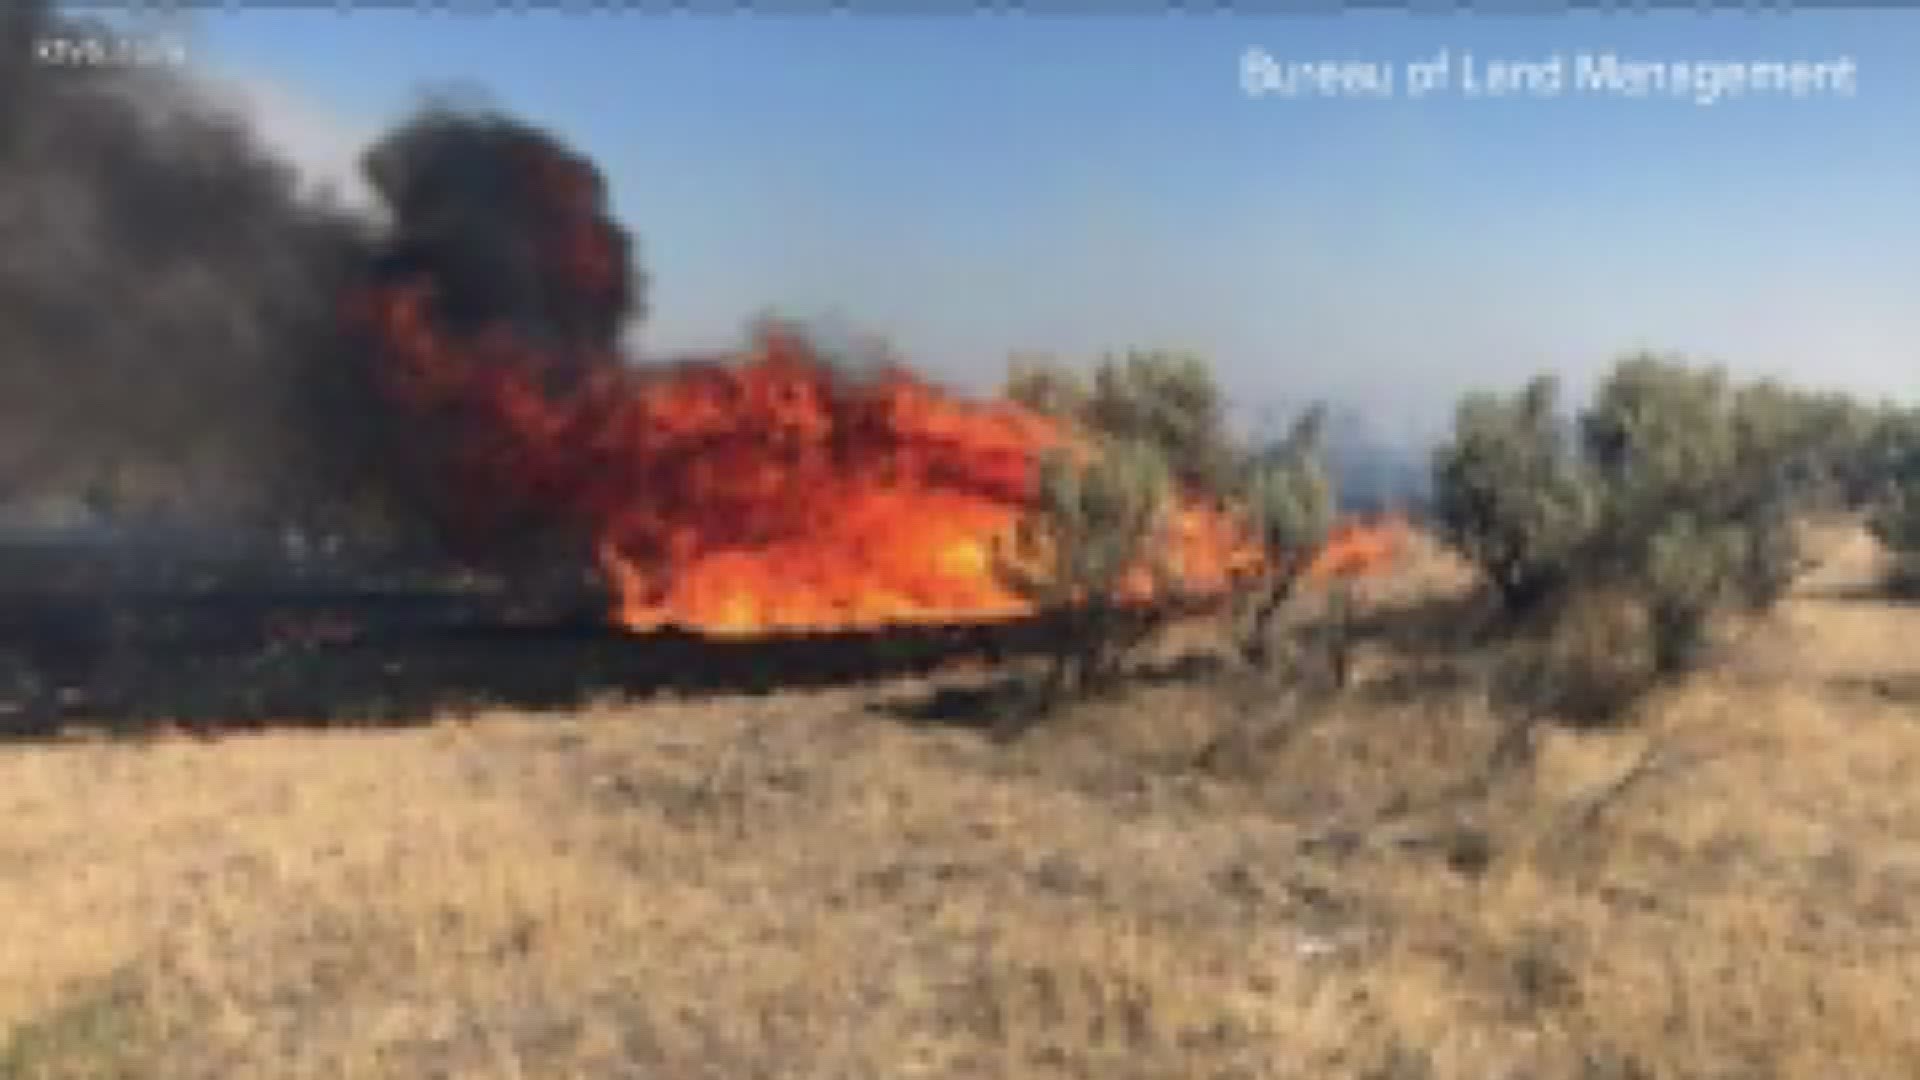 The Bureau of Land Management said the Drops Fire started just outside the city near a transfer station and has now spread to an estimated 3,000 acres.